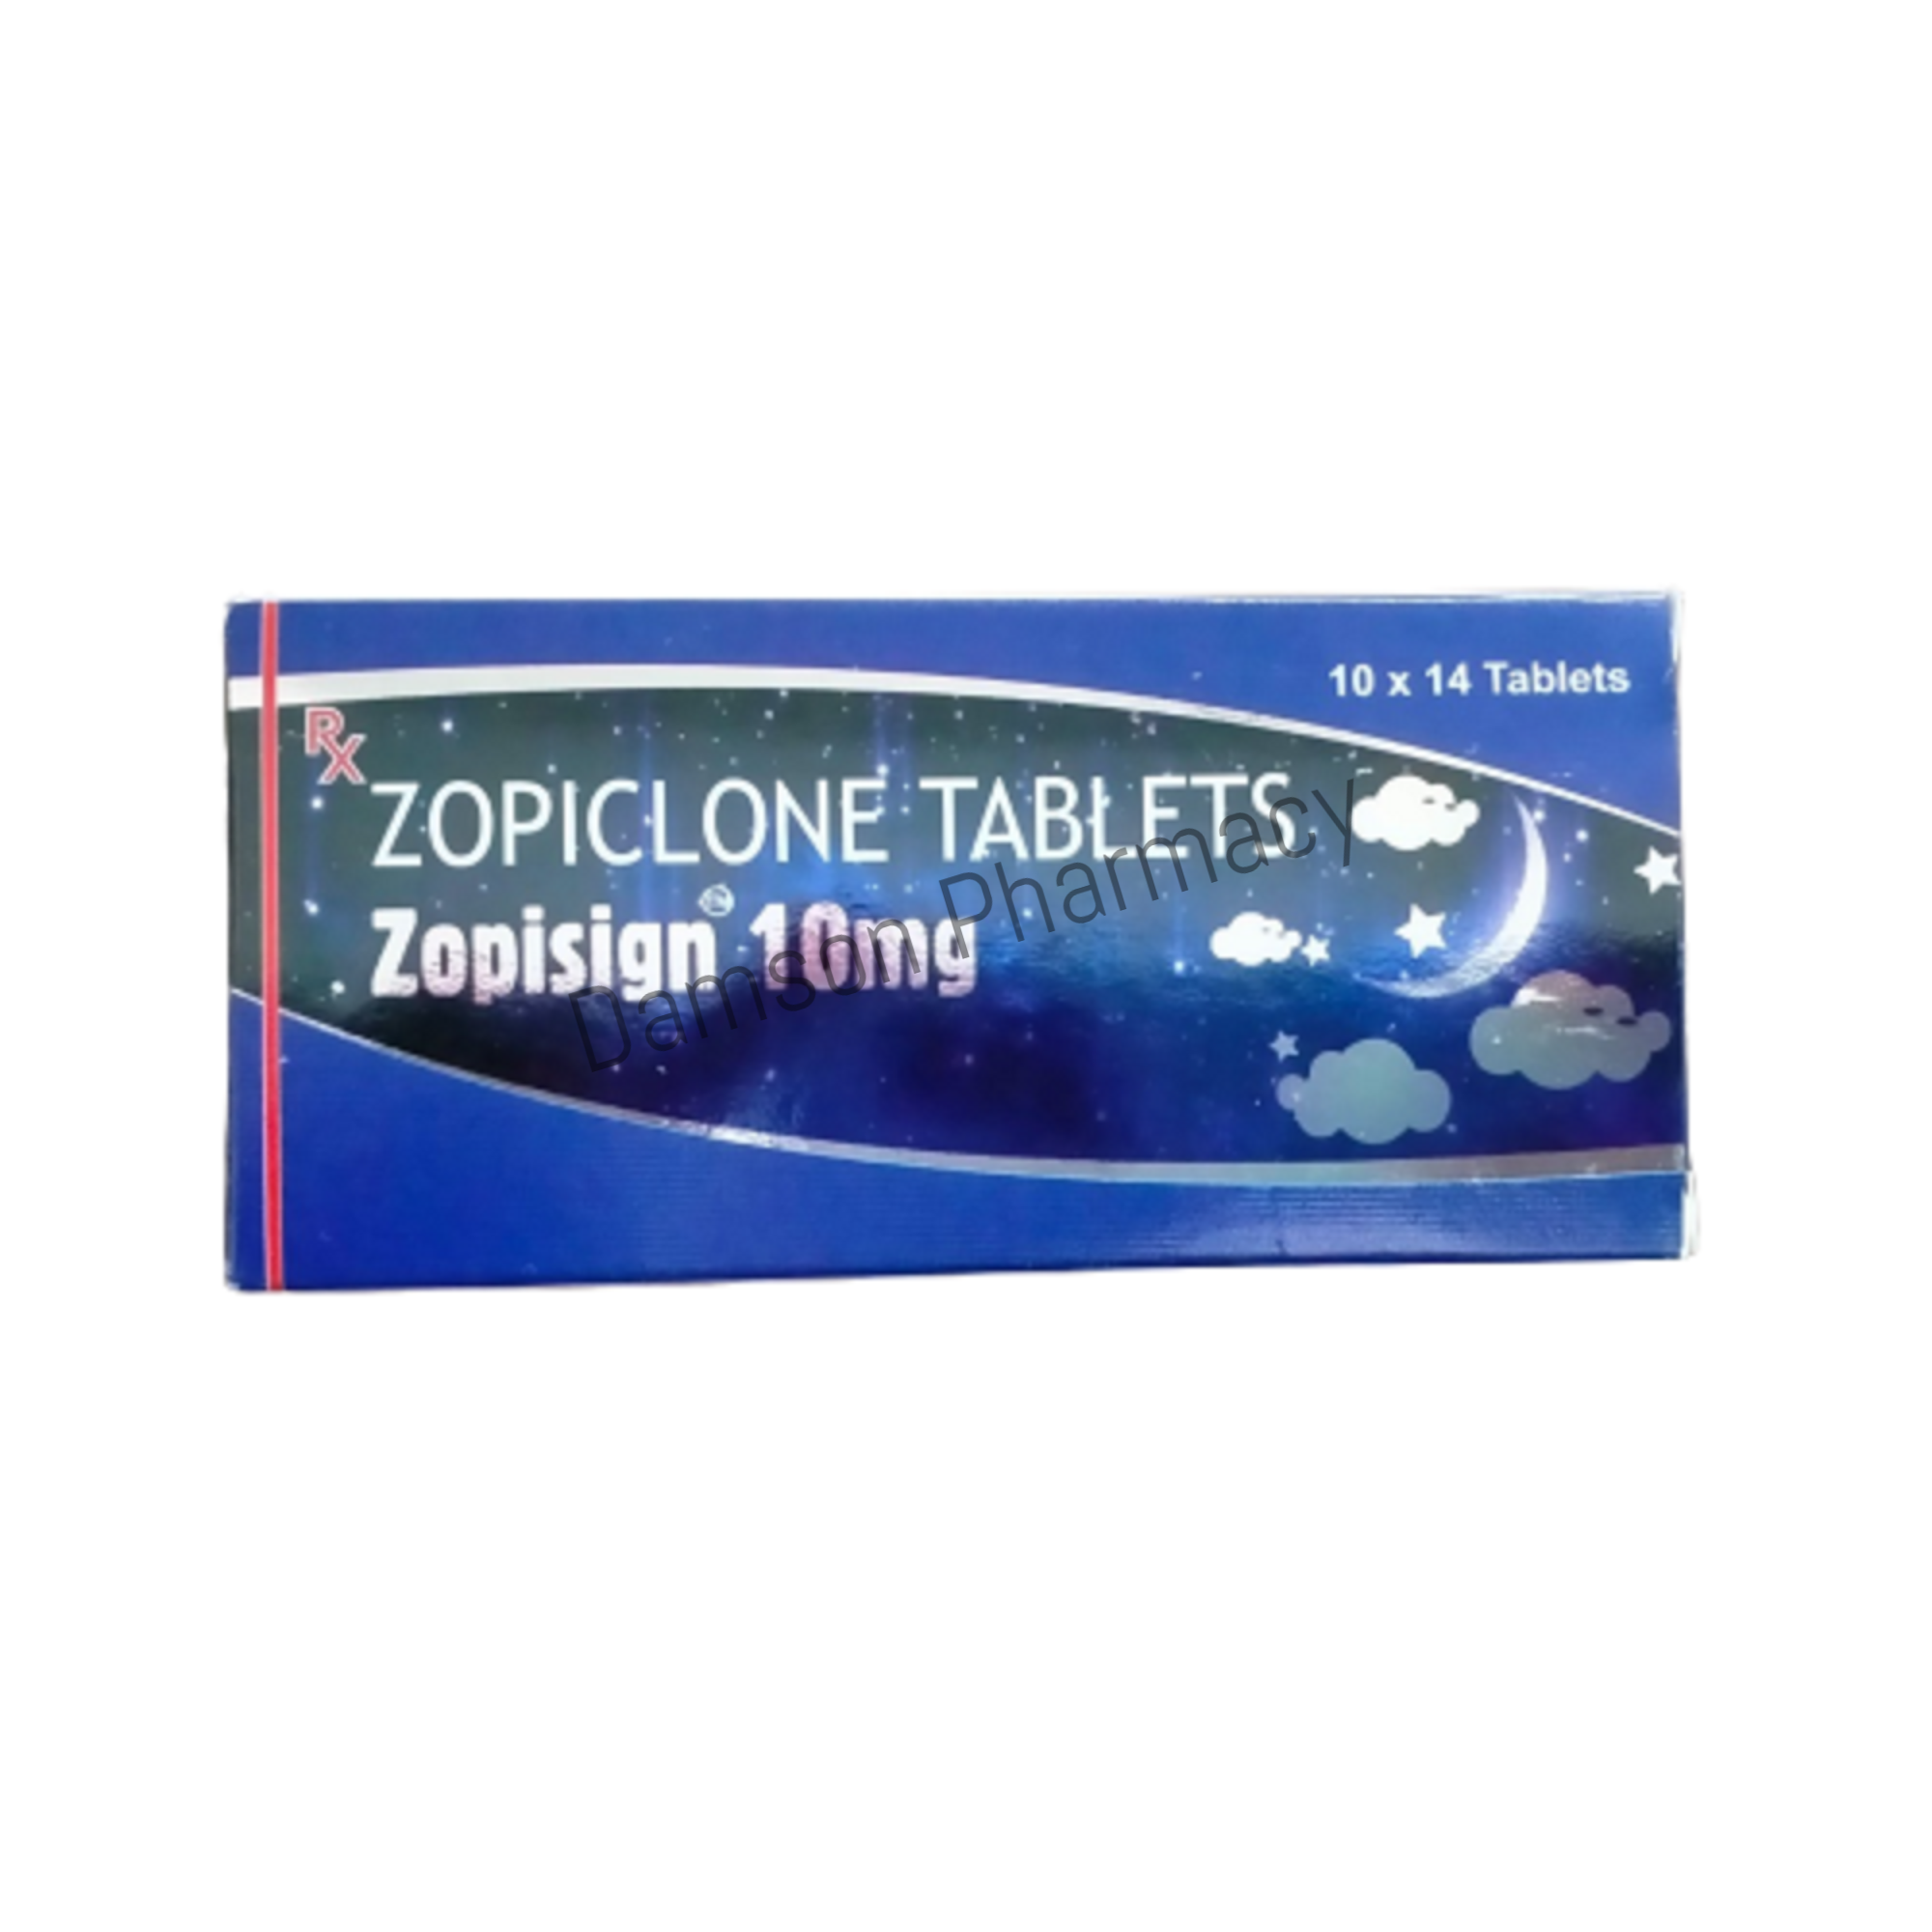 Zopisign 10mg Zopiclone Tablet: Uses | Substitute | Overview